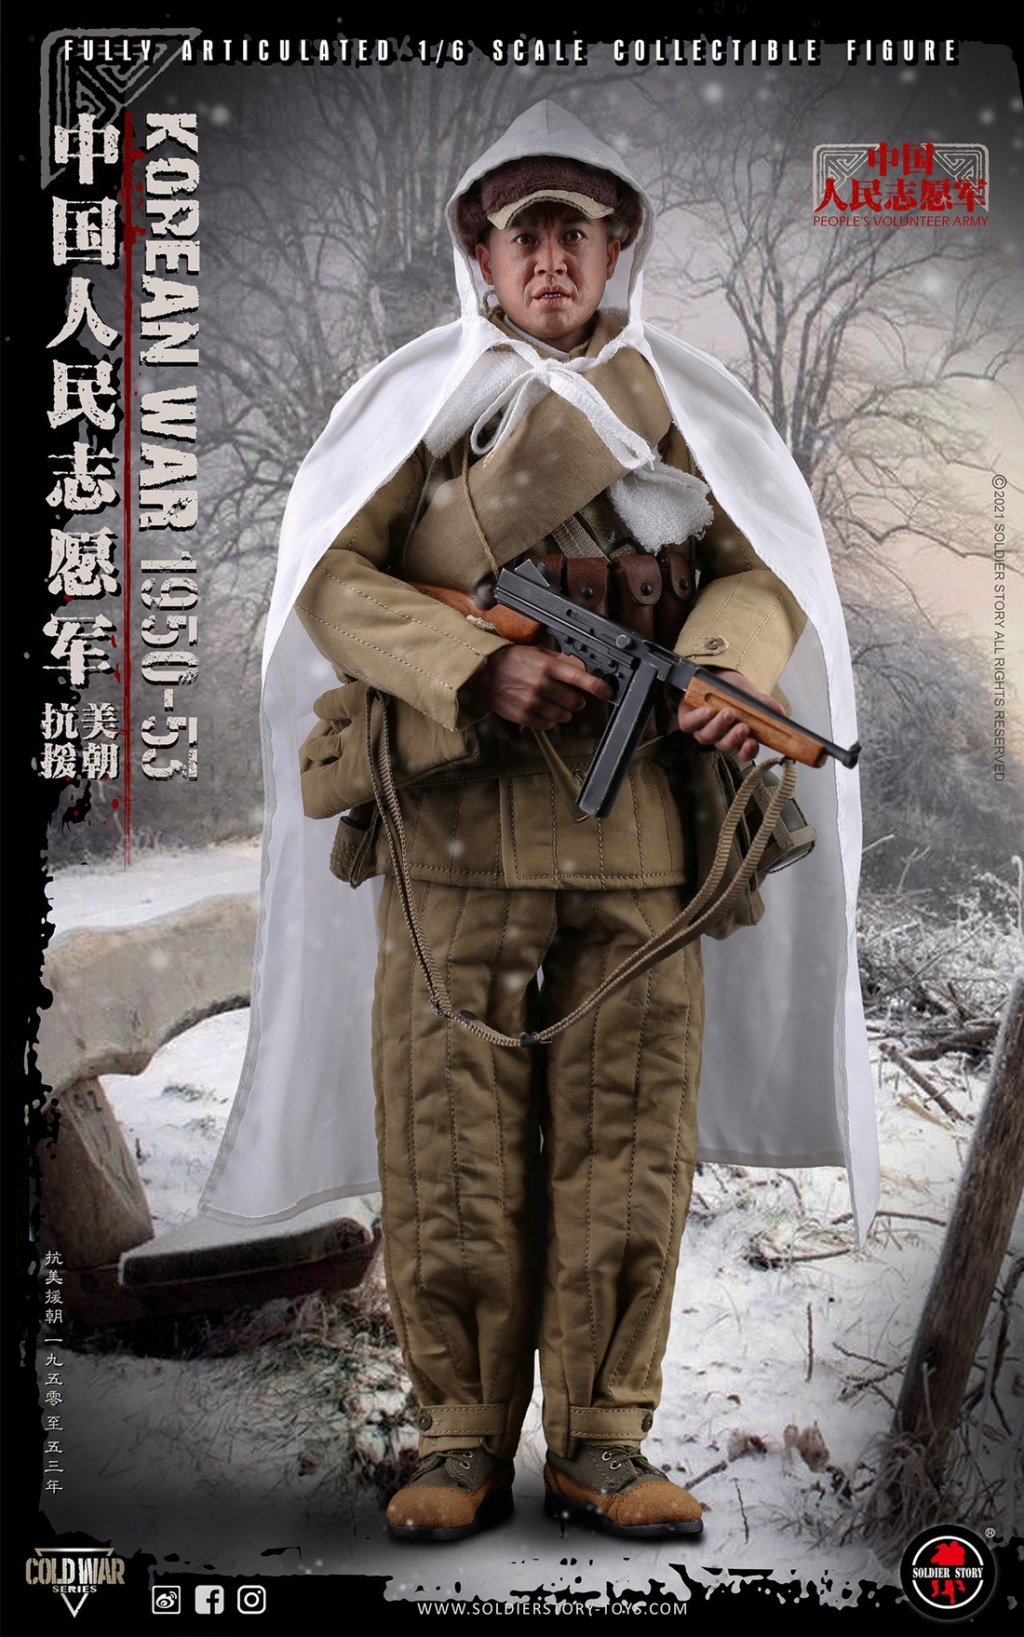 Soldierstory - NEW PRODUCT: SOLDIER STORY: 1/6 Chinese People’s Volunteers 1950-53 Collectible Action Figure (#SS-124) 666a3110